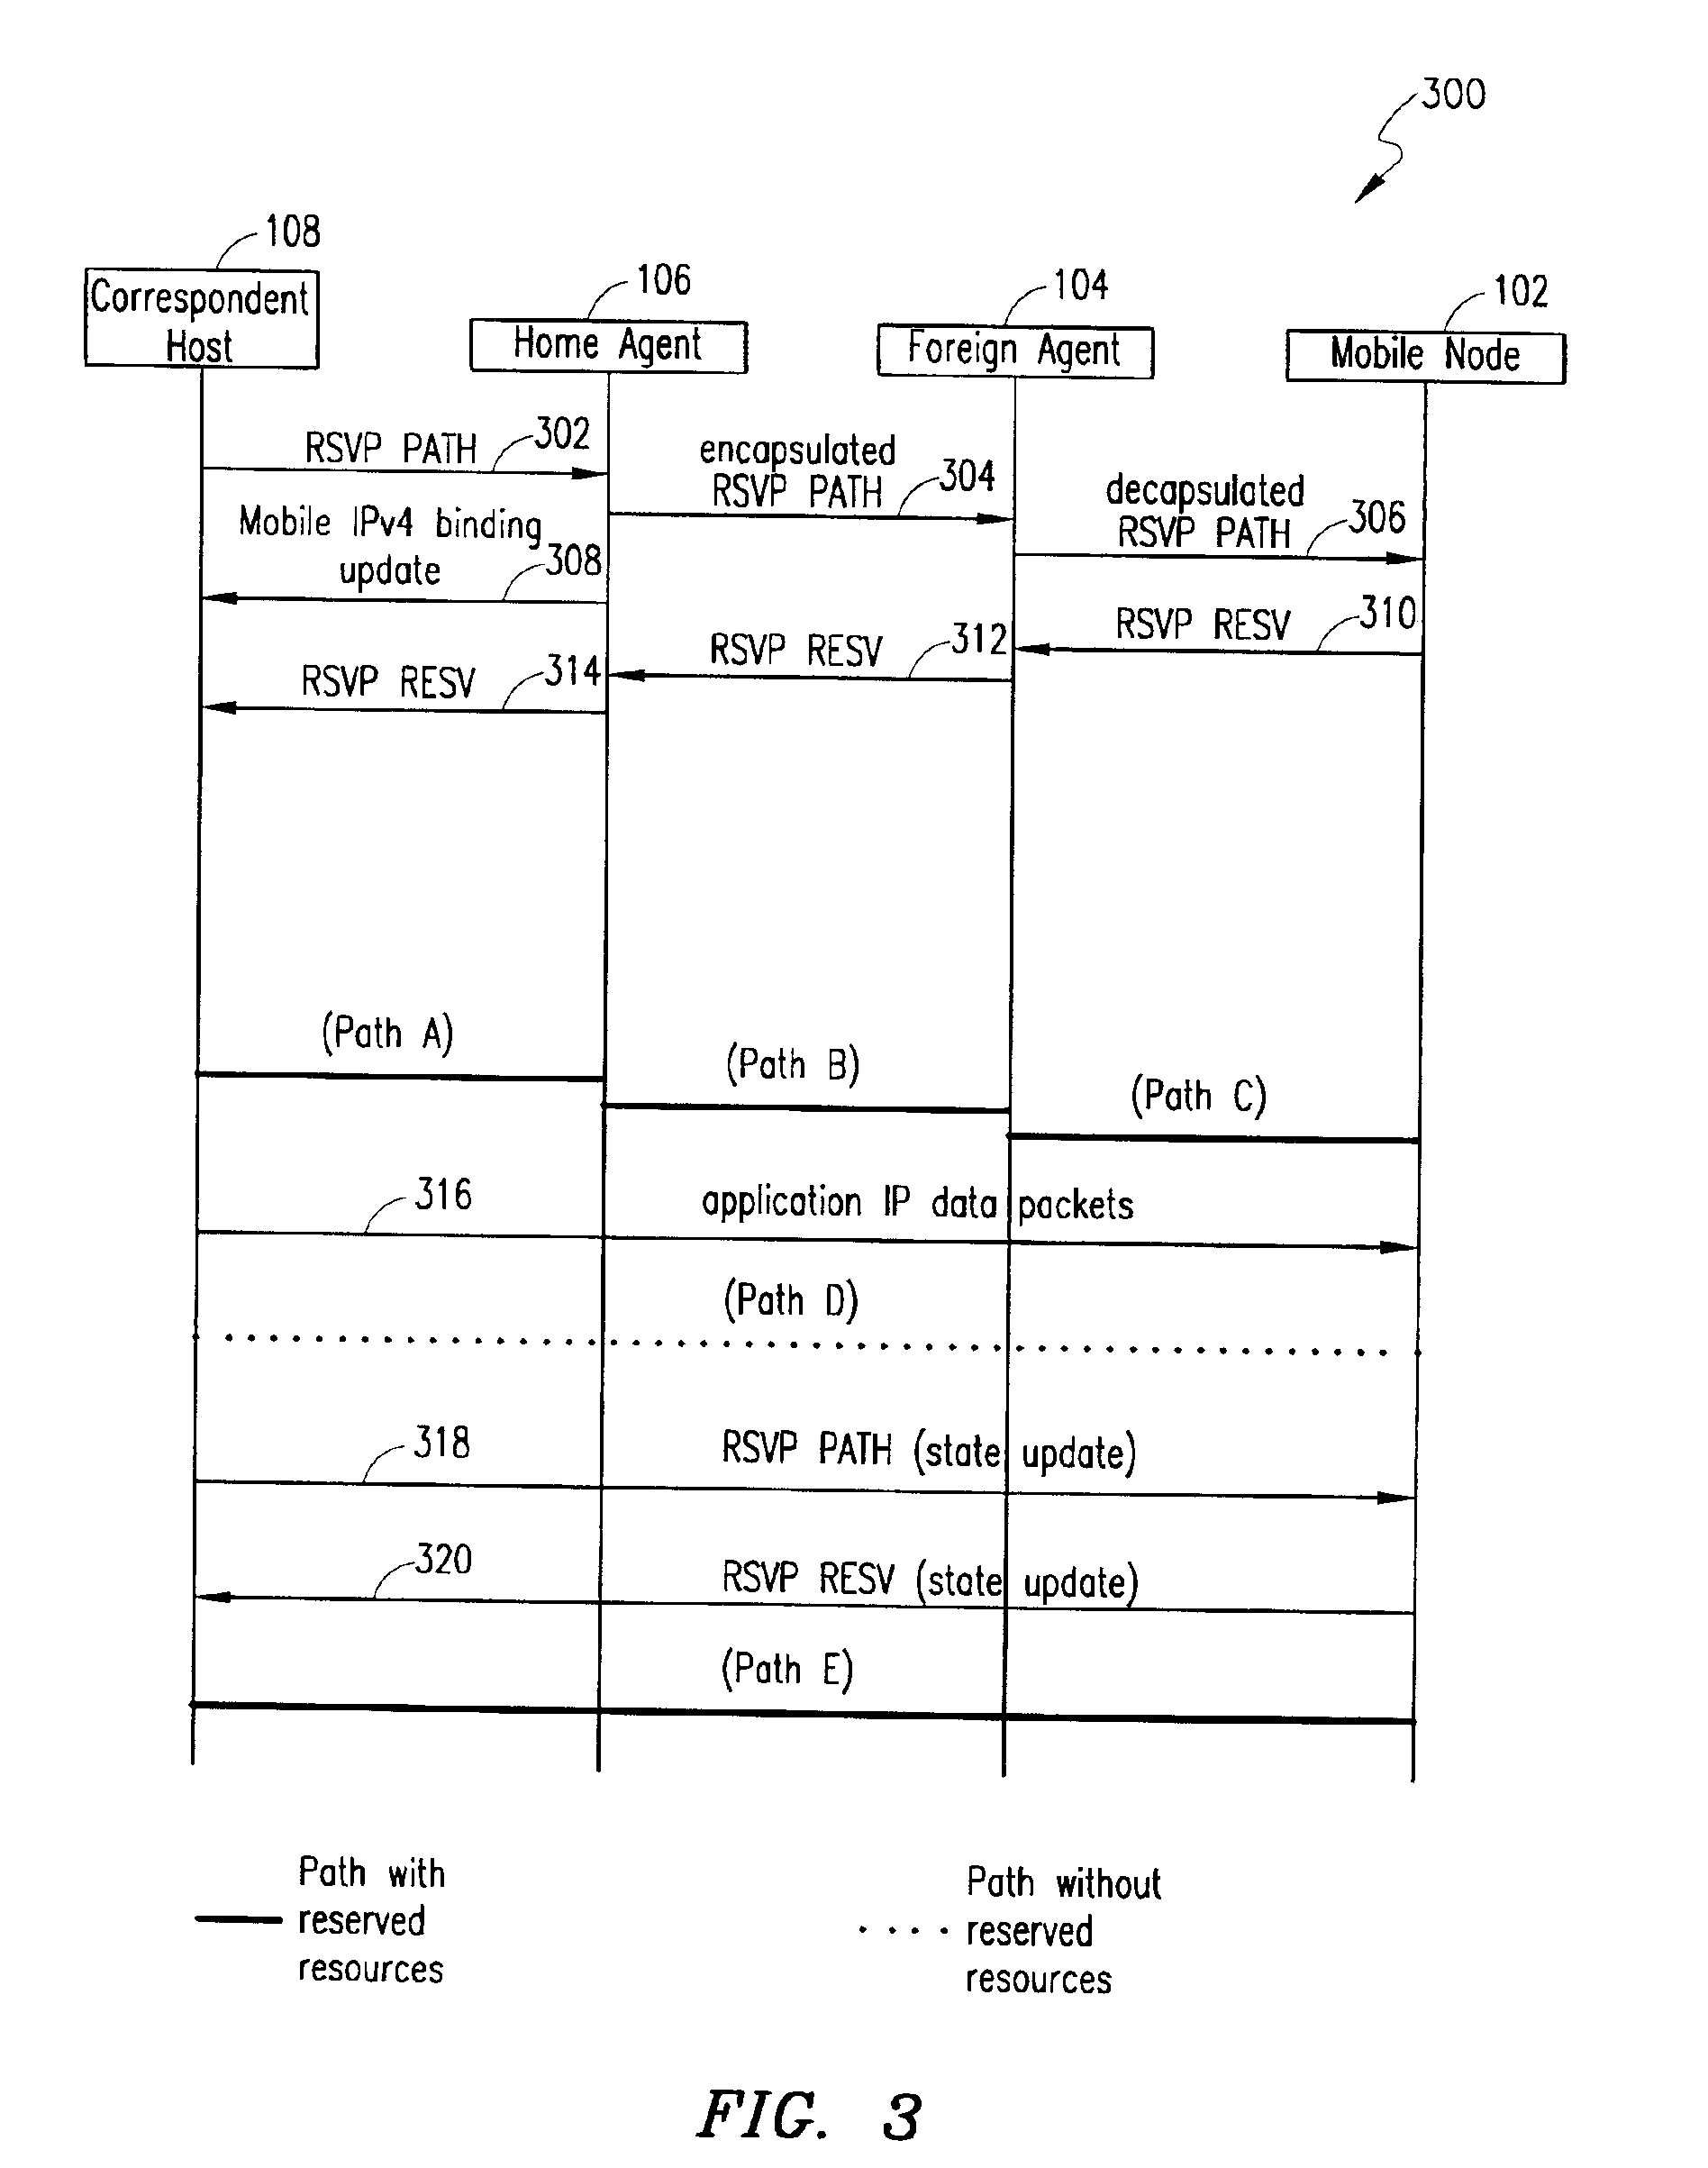 Method and system for inter-operability between mobile IP and RSVP during route optimization